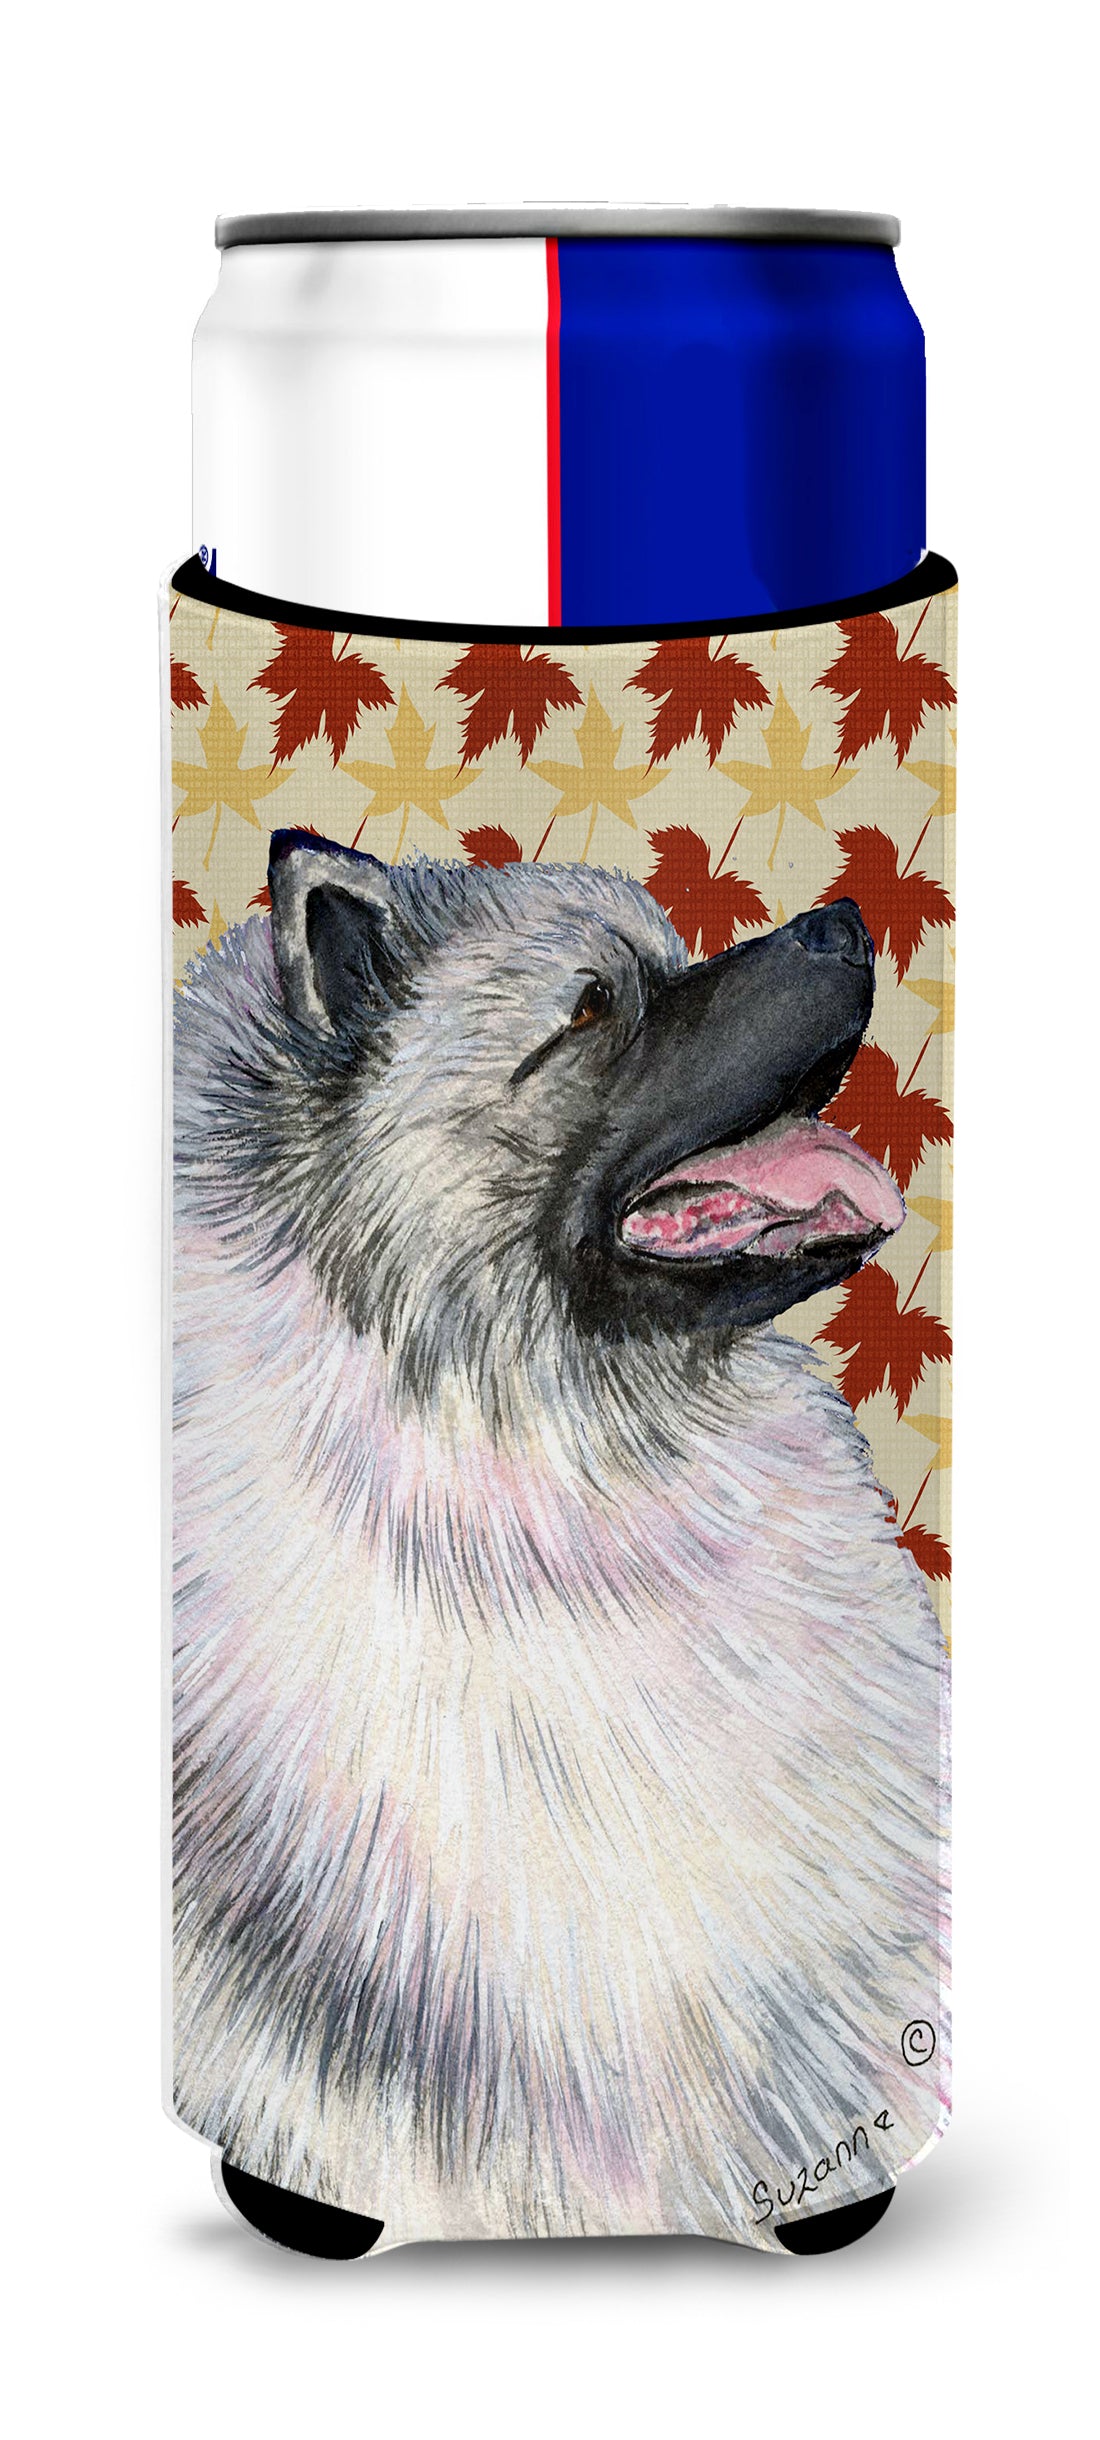 Keeshond Fall Leaves Portrait Ultra Beverage Insulators for slim cans SS4368MUK